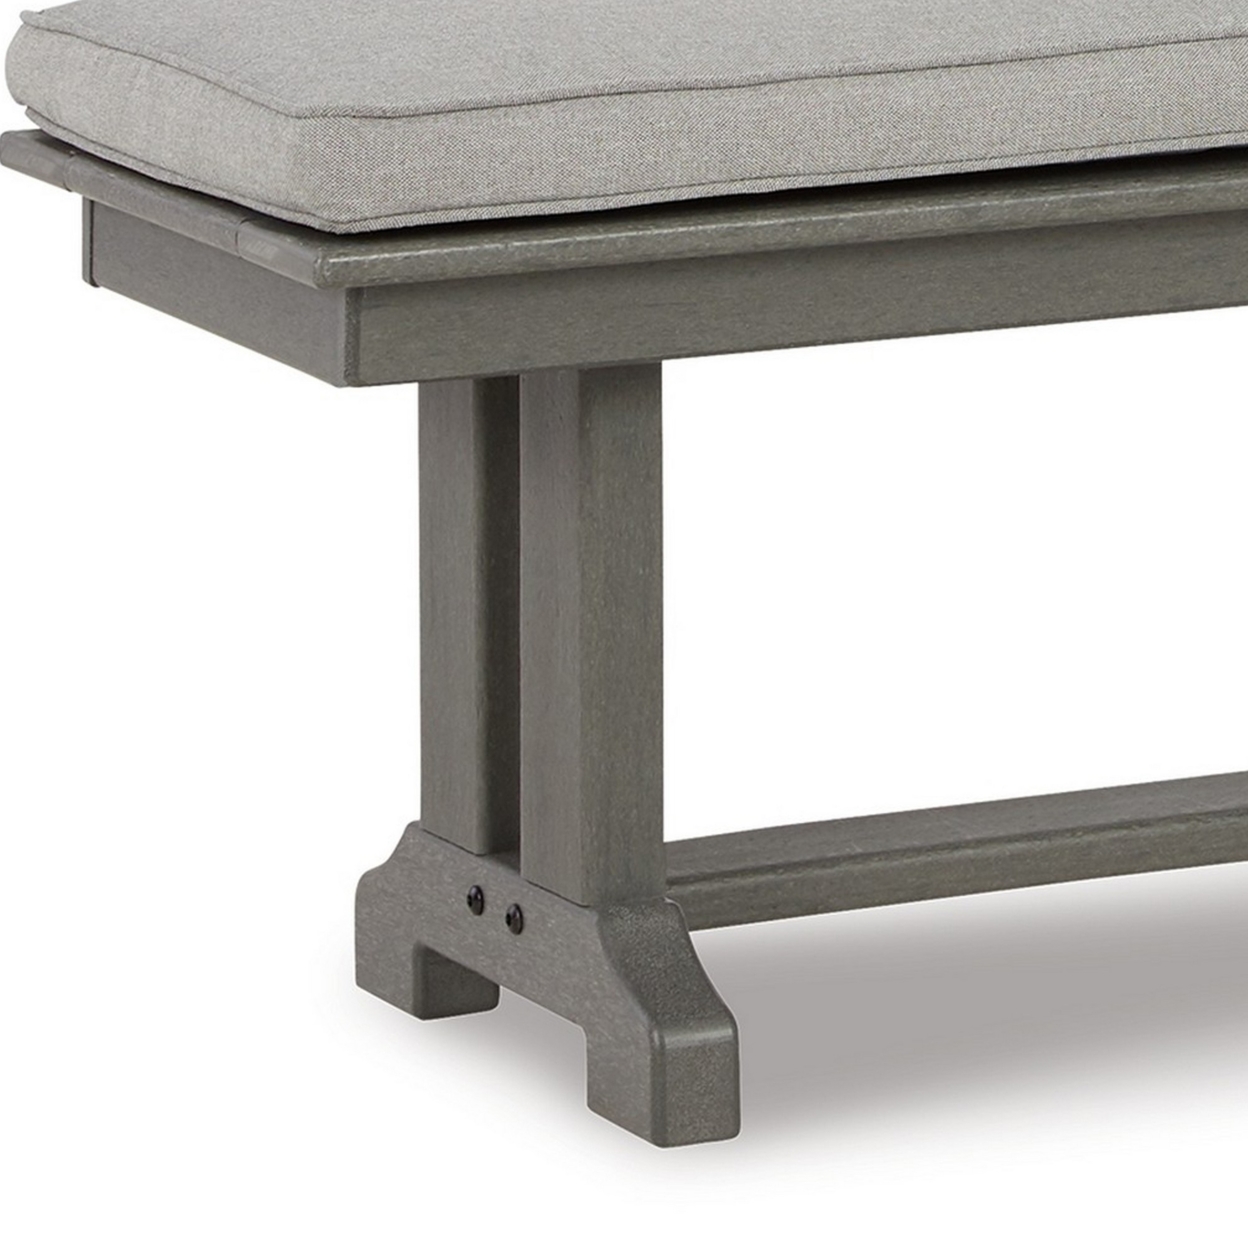 Vrai 54 Inch Outdoor Bench, Gray Wood Frame, Trestle Base, Cushioned Seat